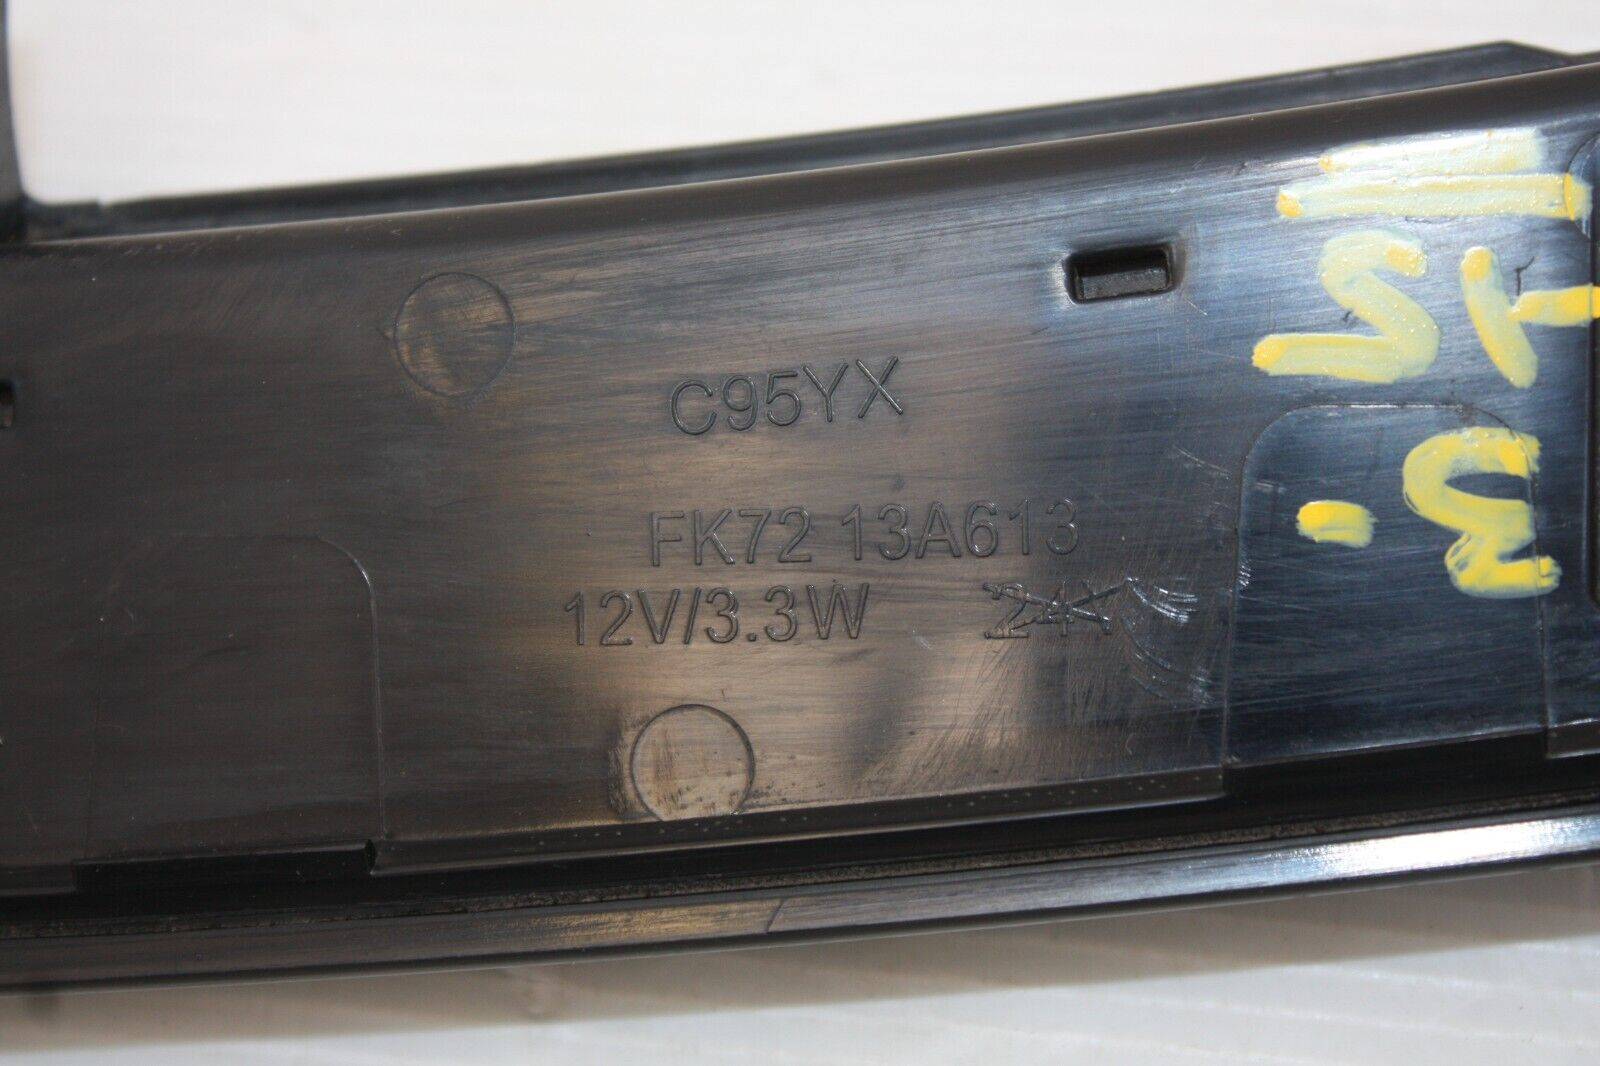 Land-Rover-Discovery-Sport-L550-Brake-Light-2015-TO-2019-FK72-13A613-AC-SEE-PIC-175445916328-11